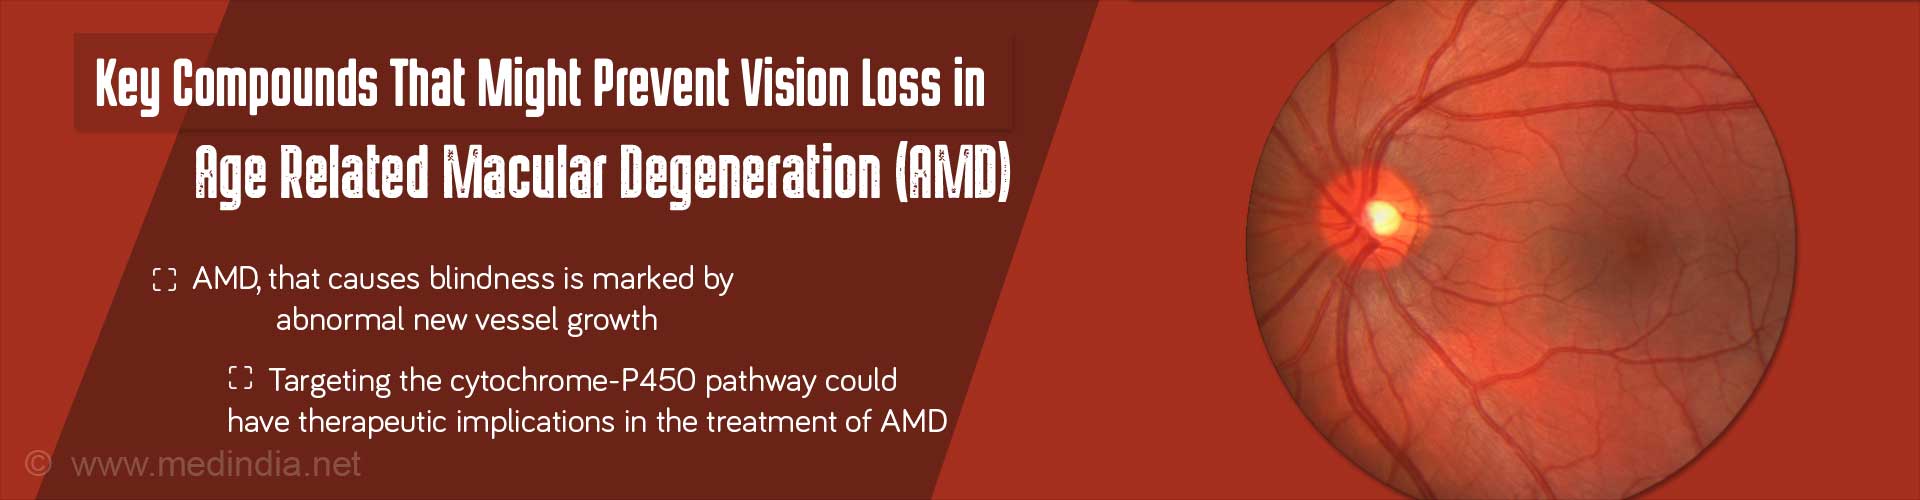 Key compounds that might prevent vision loss in age-related macular degeneration (AMD)
- AMD, that cause blindness is marked by abnormal new vessel growth
- targeting the cytochrome-P450 pathway could have therapeutic implications in the treatment of AMD